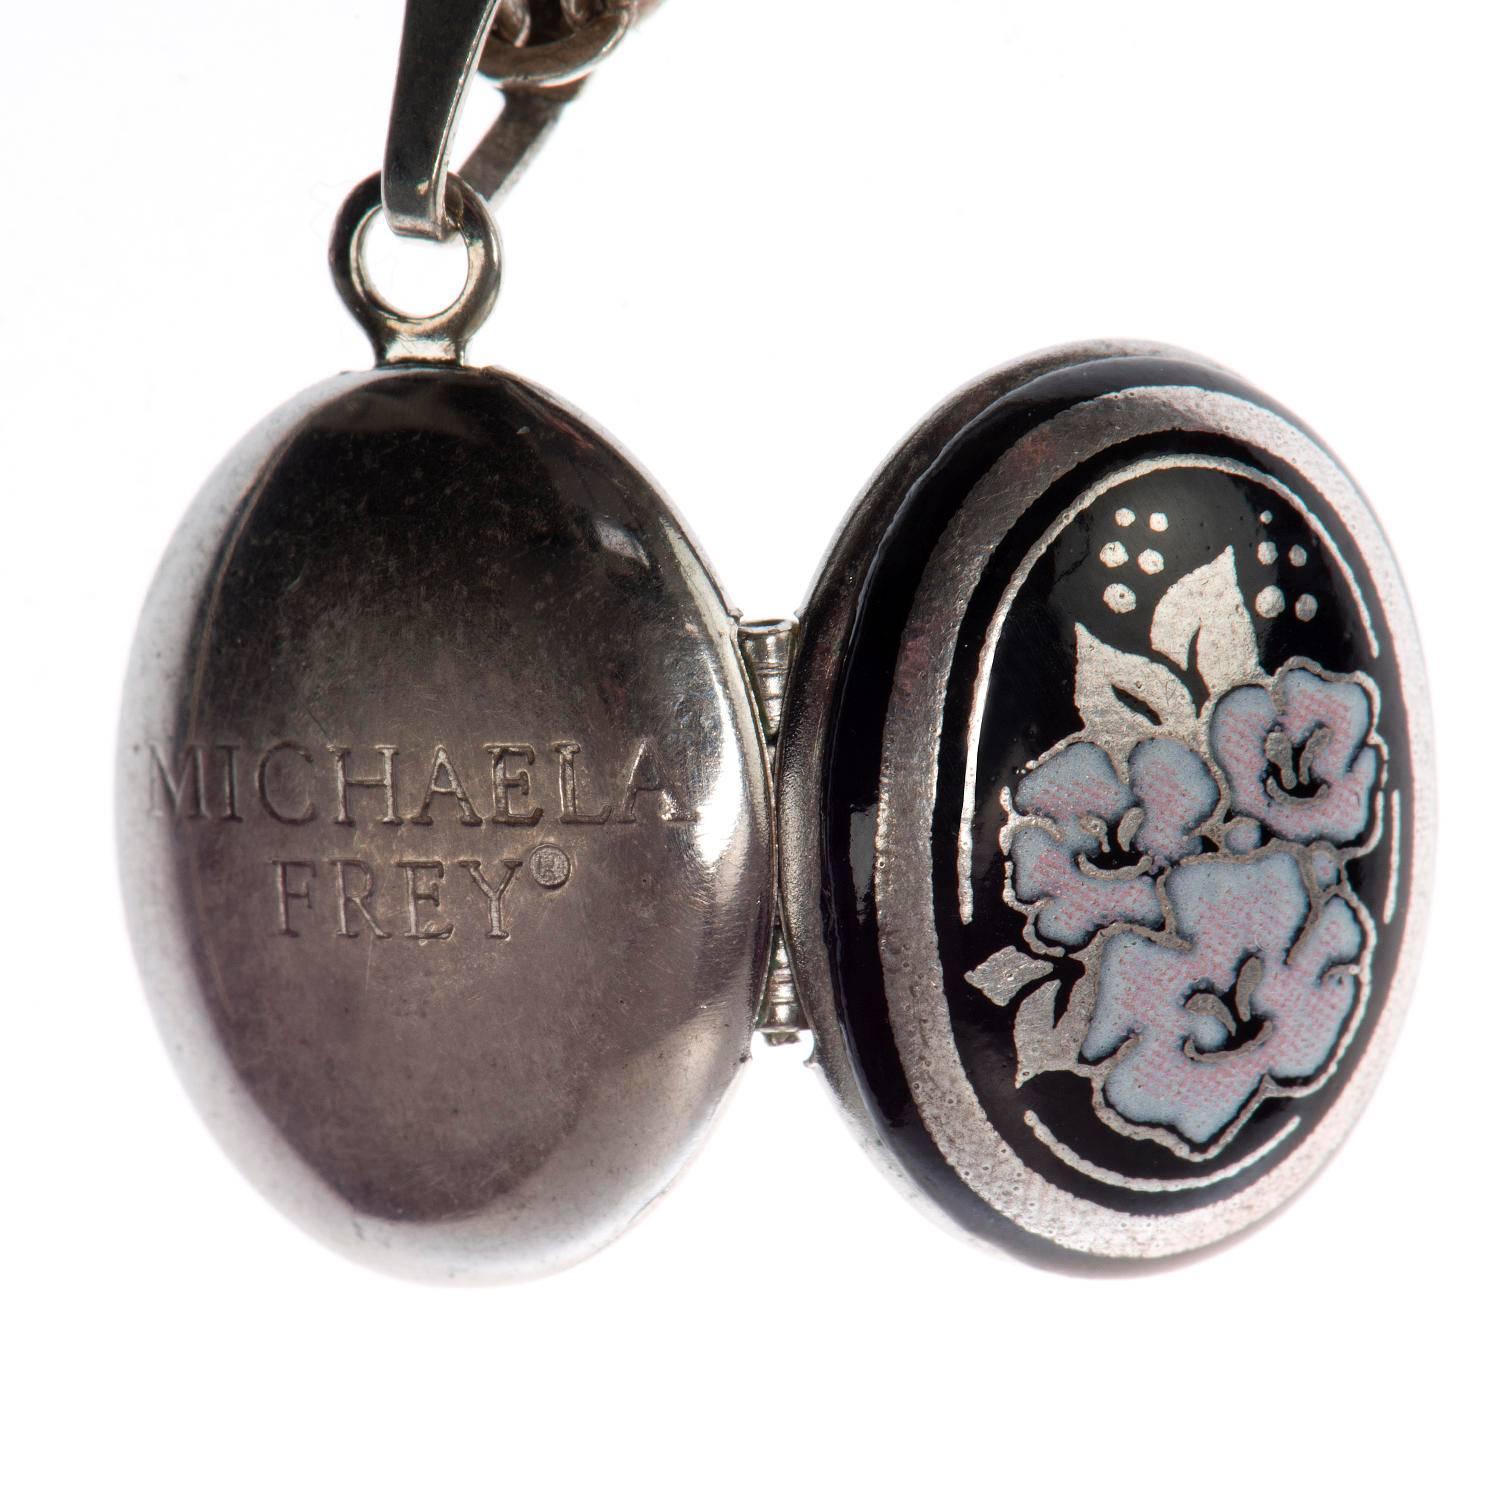 This beautiful locket, with it's fancy-link chain is a rare piece from the important 'Michaela Frey' workshops in Austria. Michaela Frey was retained by Hermes to design & manufacture all their enamel work jewellery, and to this day still produces